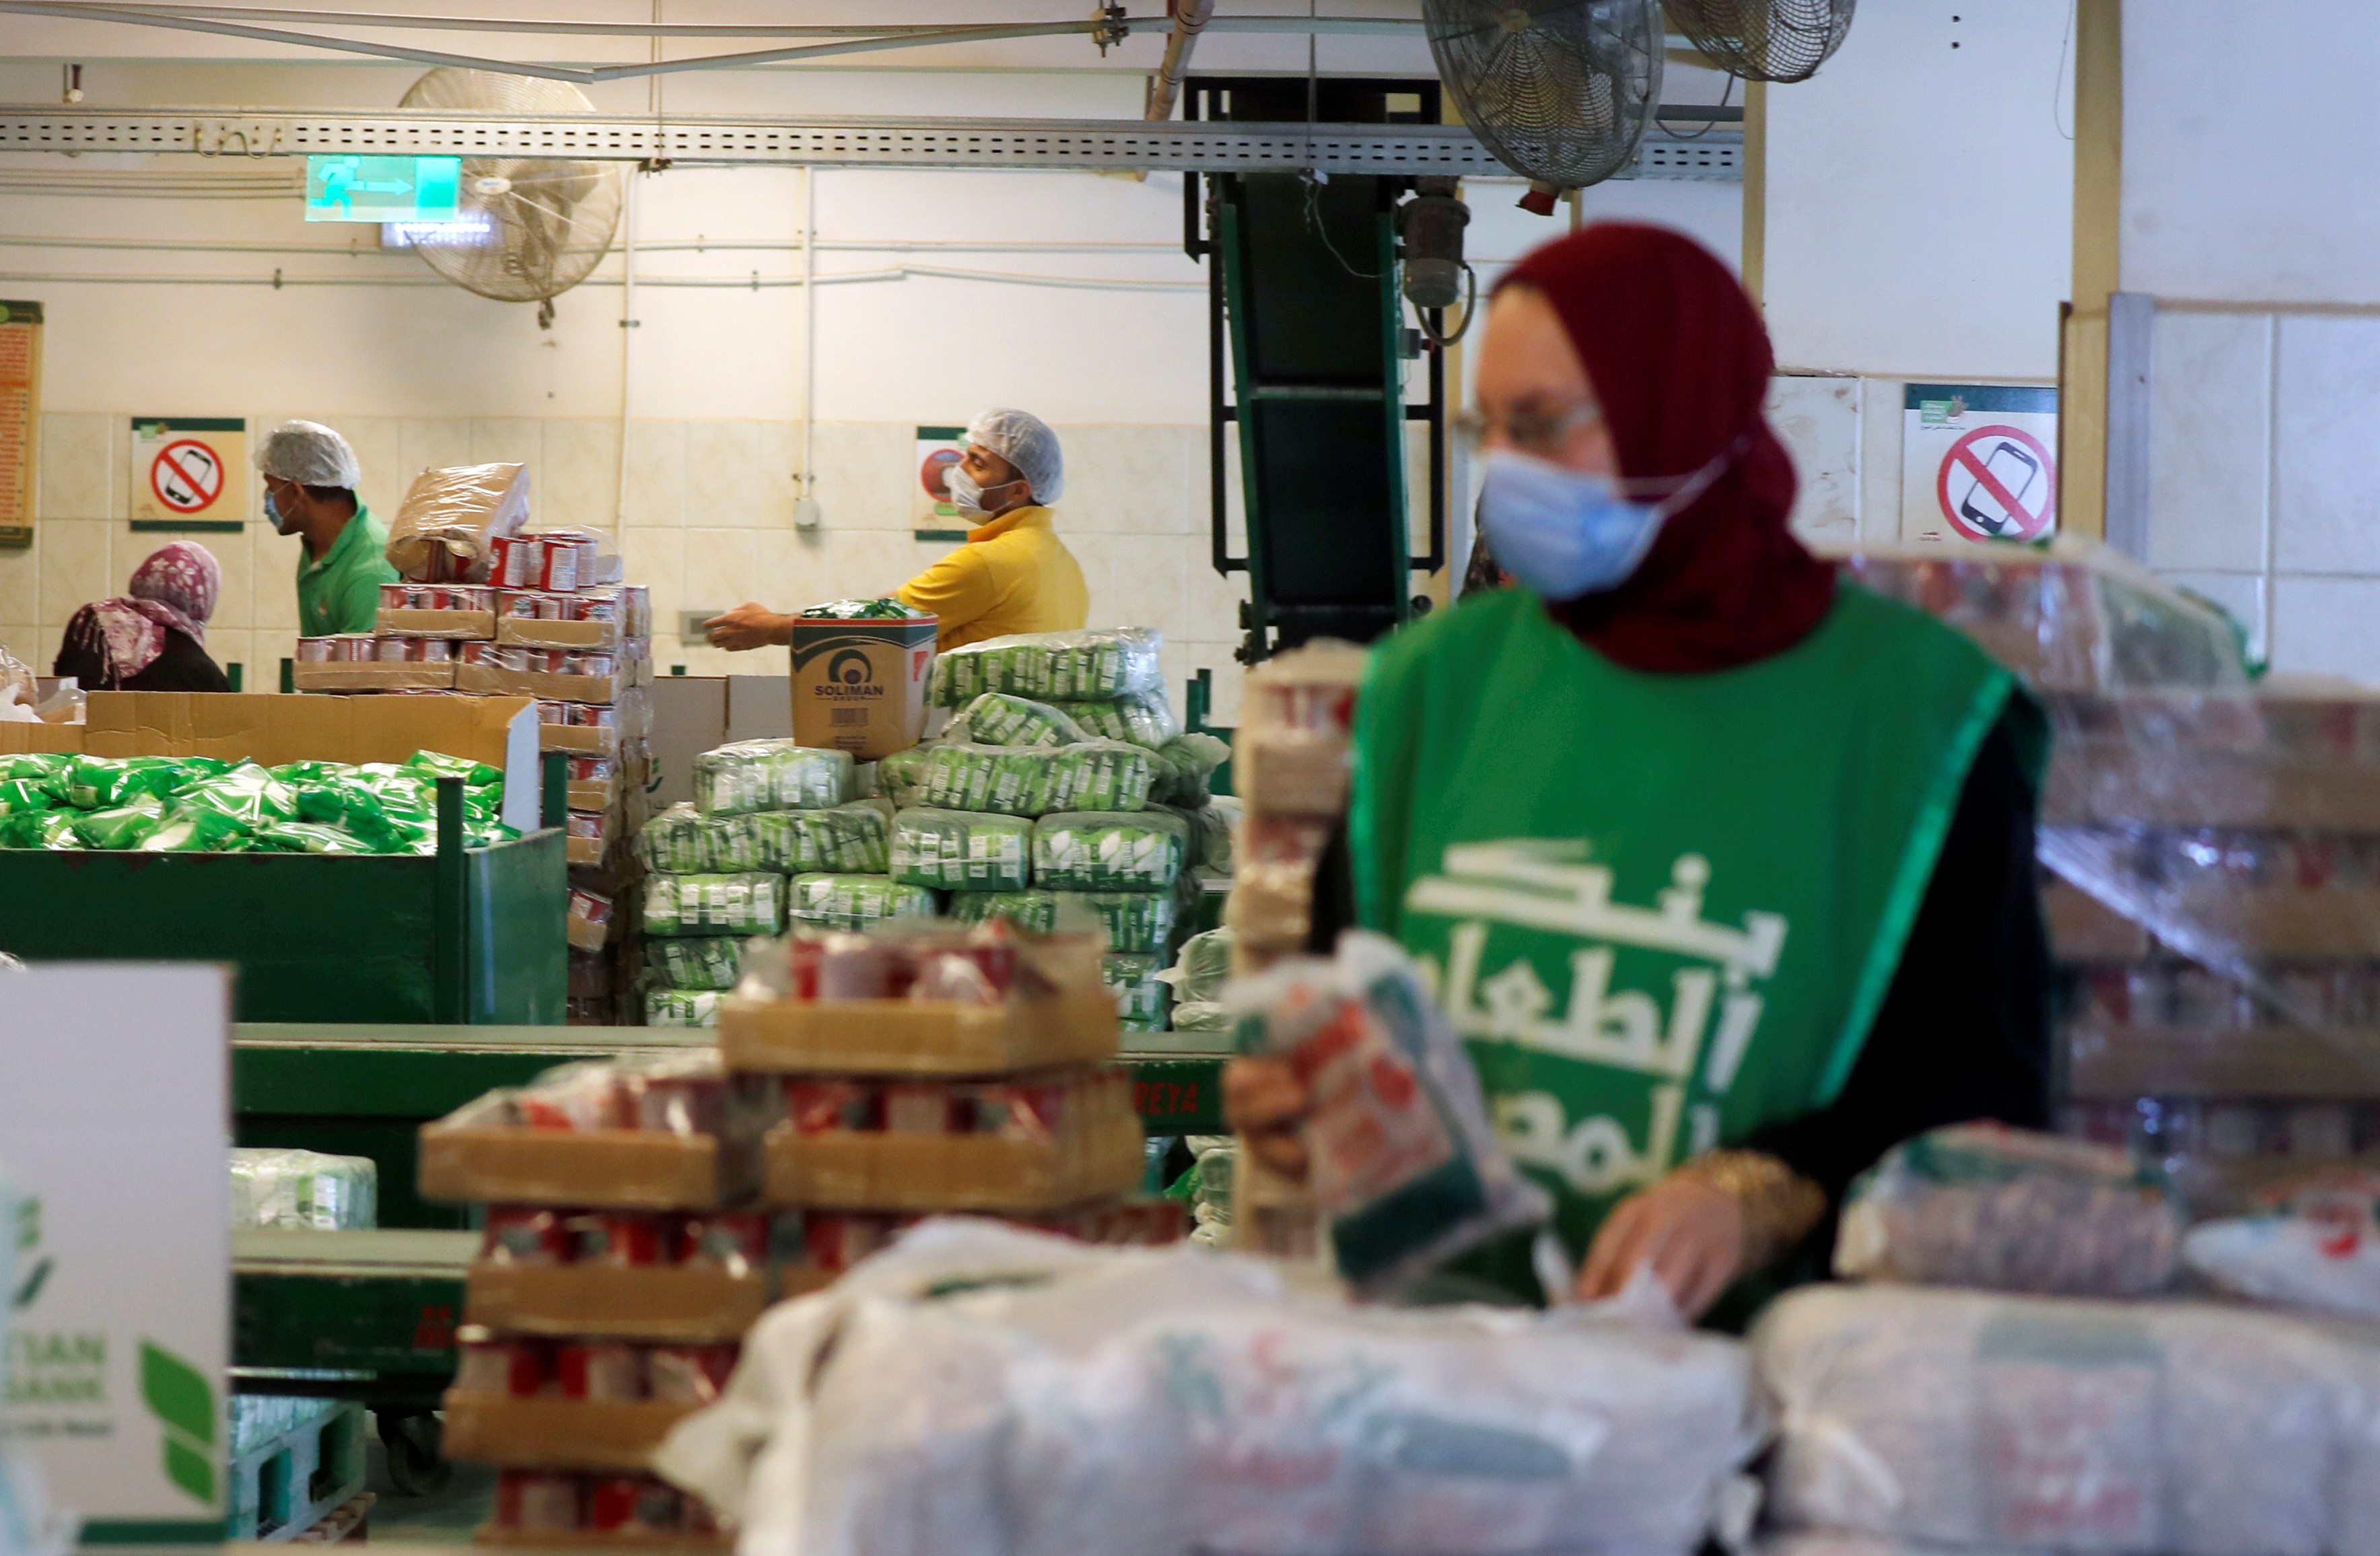 Workers of the Egyptian Food Bank fill boxes with food and aid for needy families 